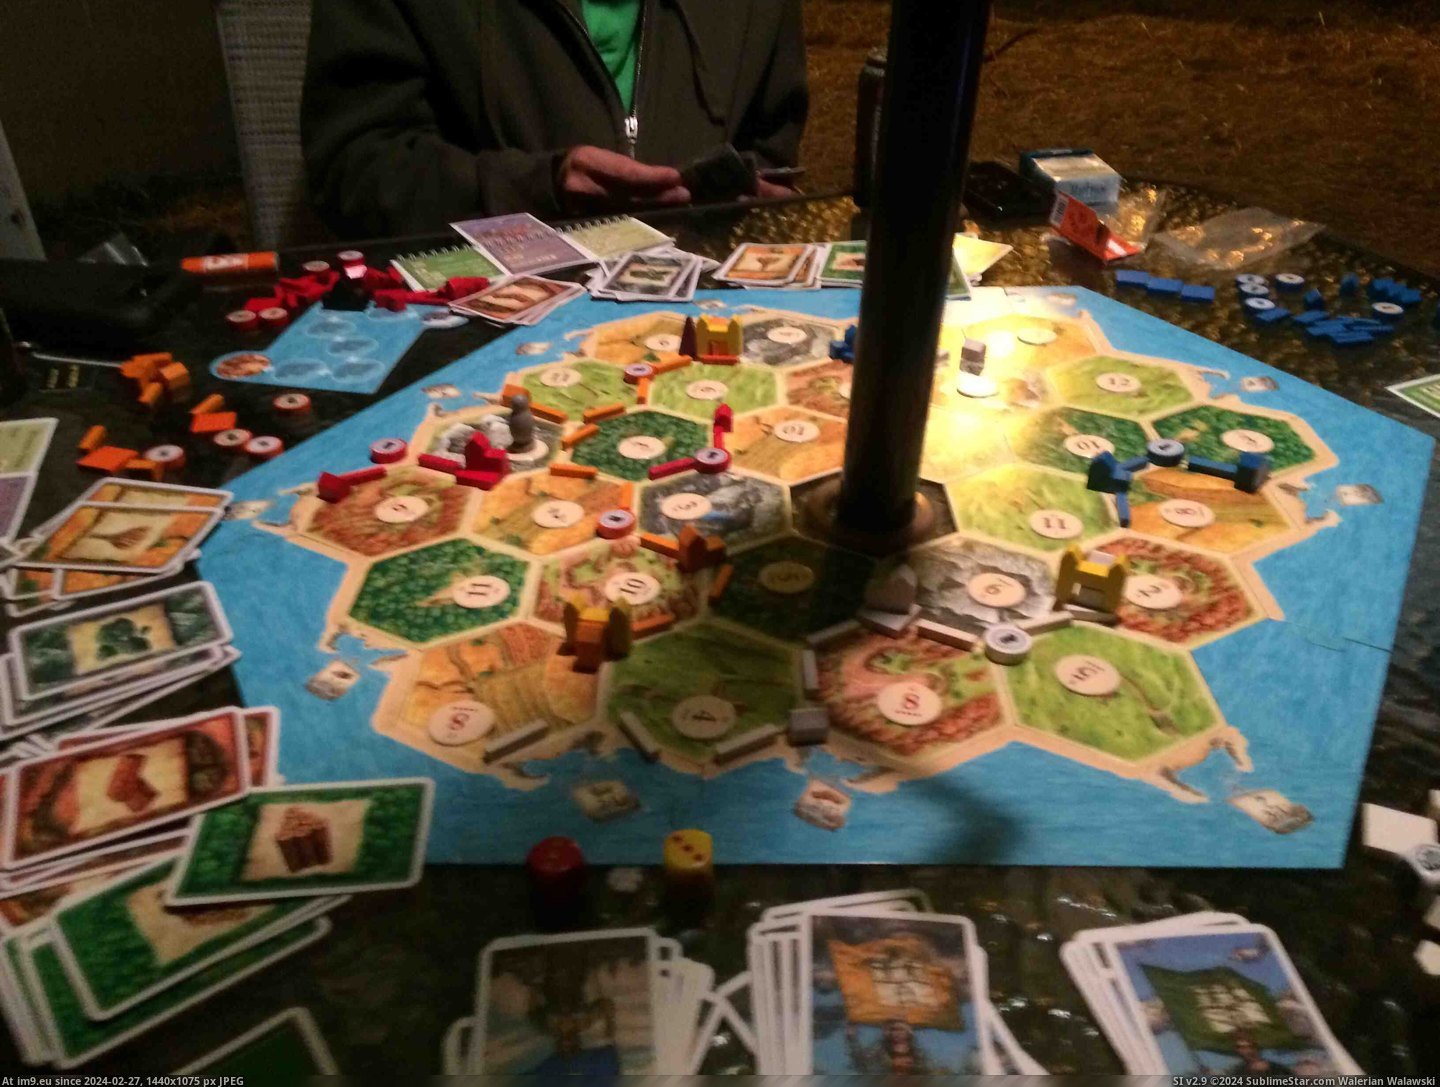 #Gaming #One #Night #Patio #Tables #Settlers #Catan #Played #Center #Umbrella [Gaming] we played settlers of catan outside last night on one of those patio tables with an umbrella in the center Pic. (Image of album My r/GAMING favs))